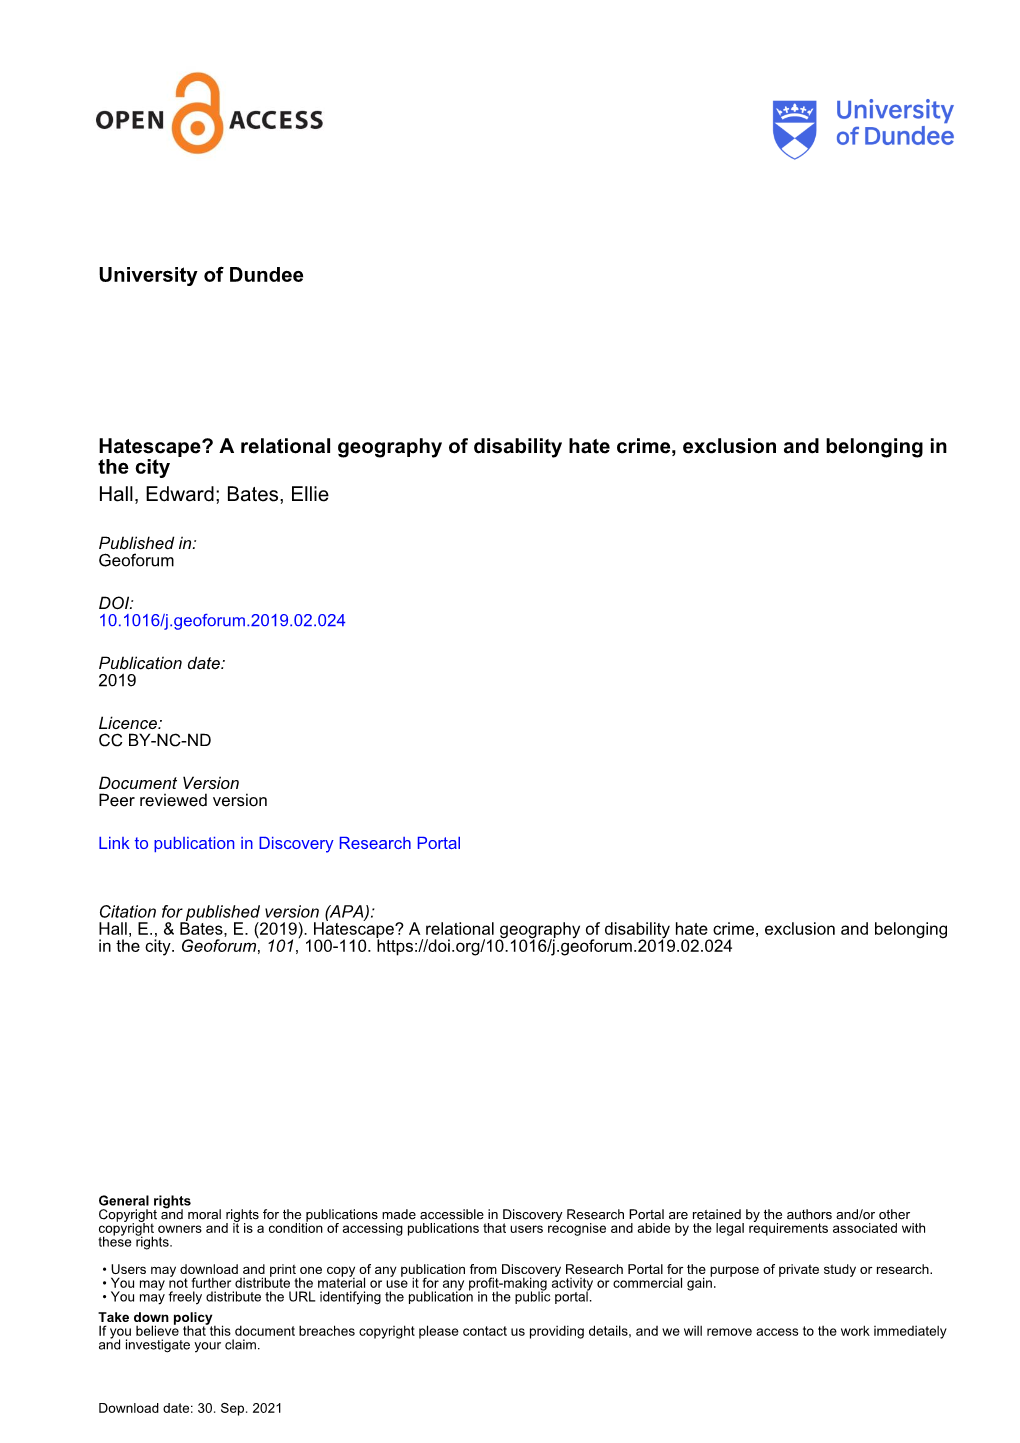 A Relational Geography of Disability Hate Crime, Exclusion and Belonging in the City Hall, Edward; Bates, Ellie